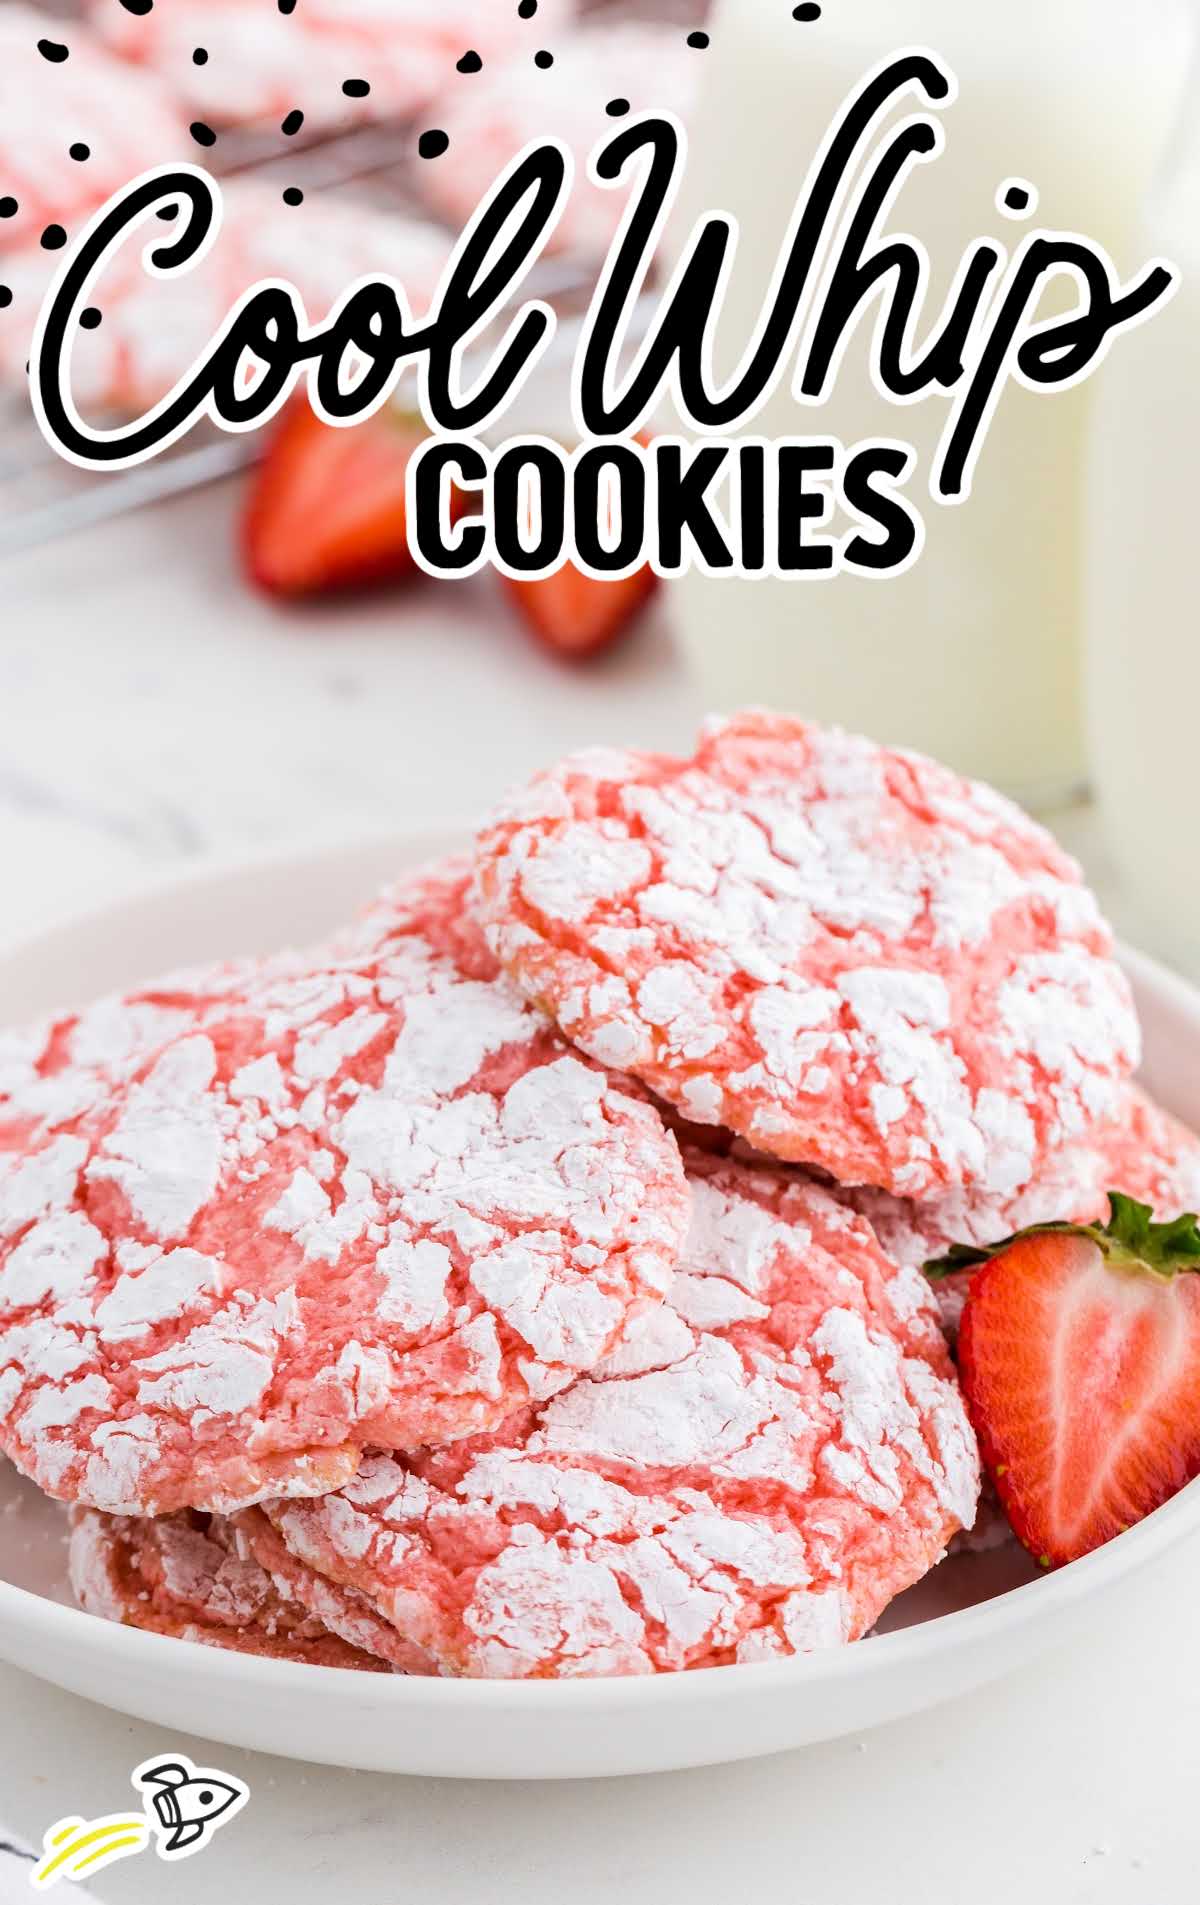 Cool Whip Cookies piled on a plate with a slice of strawberries